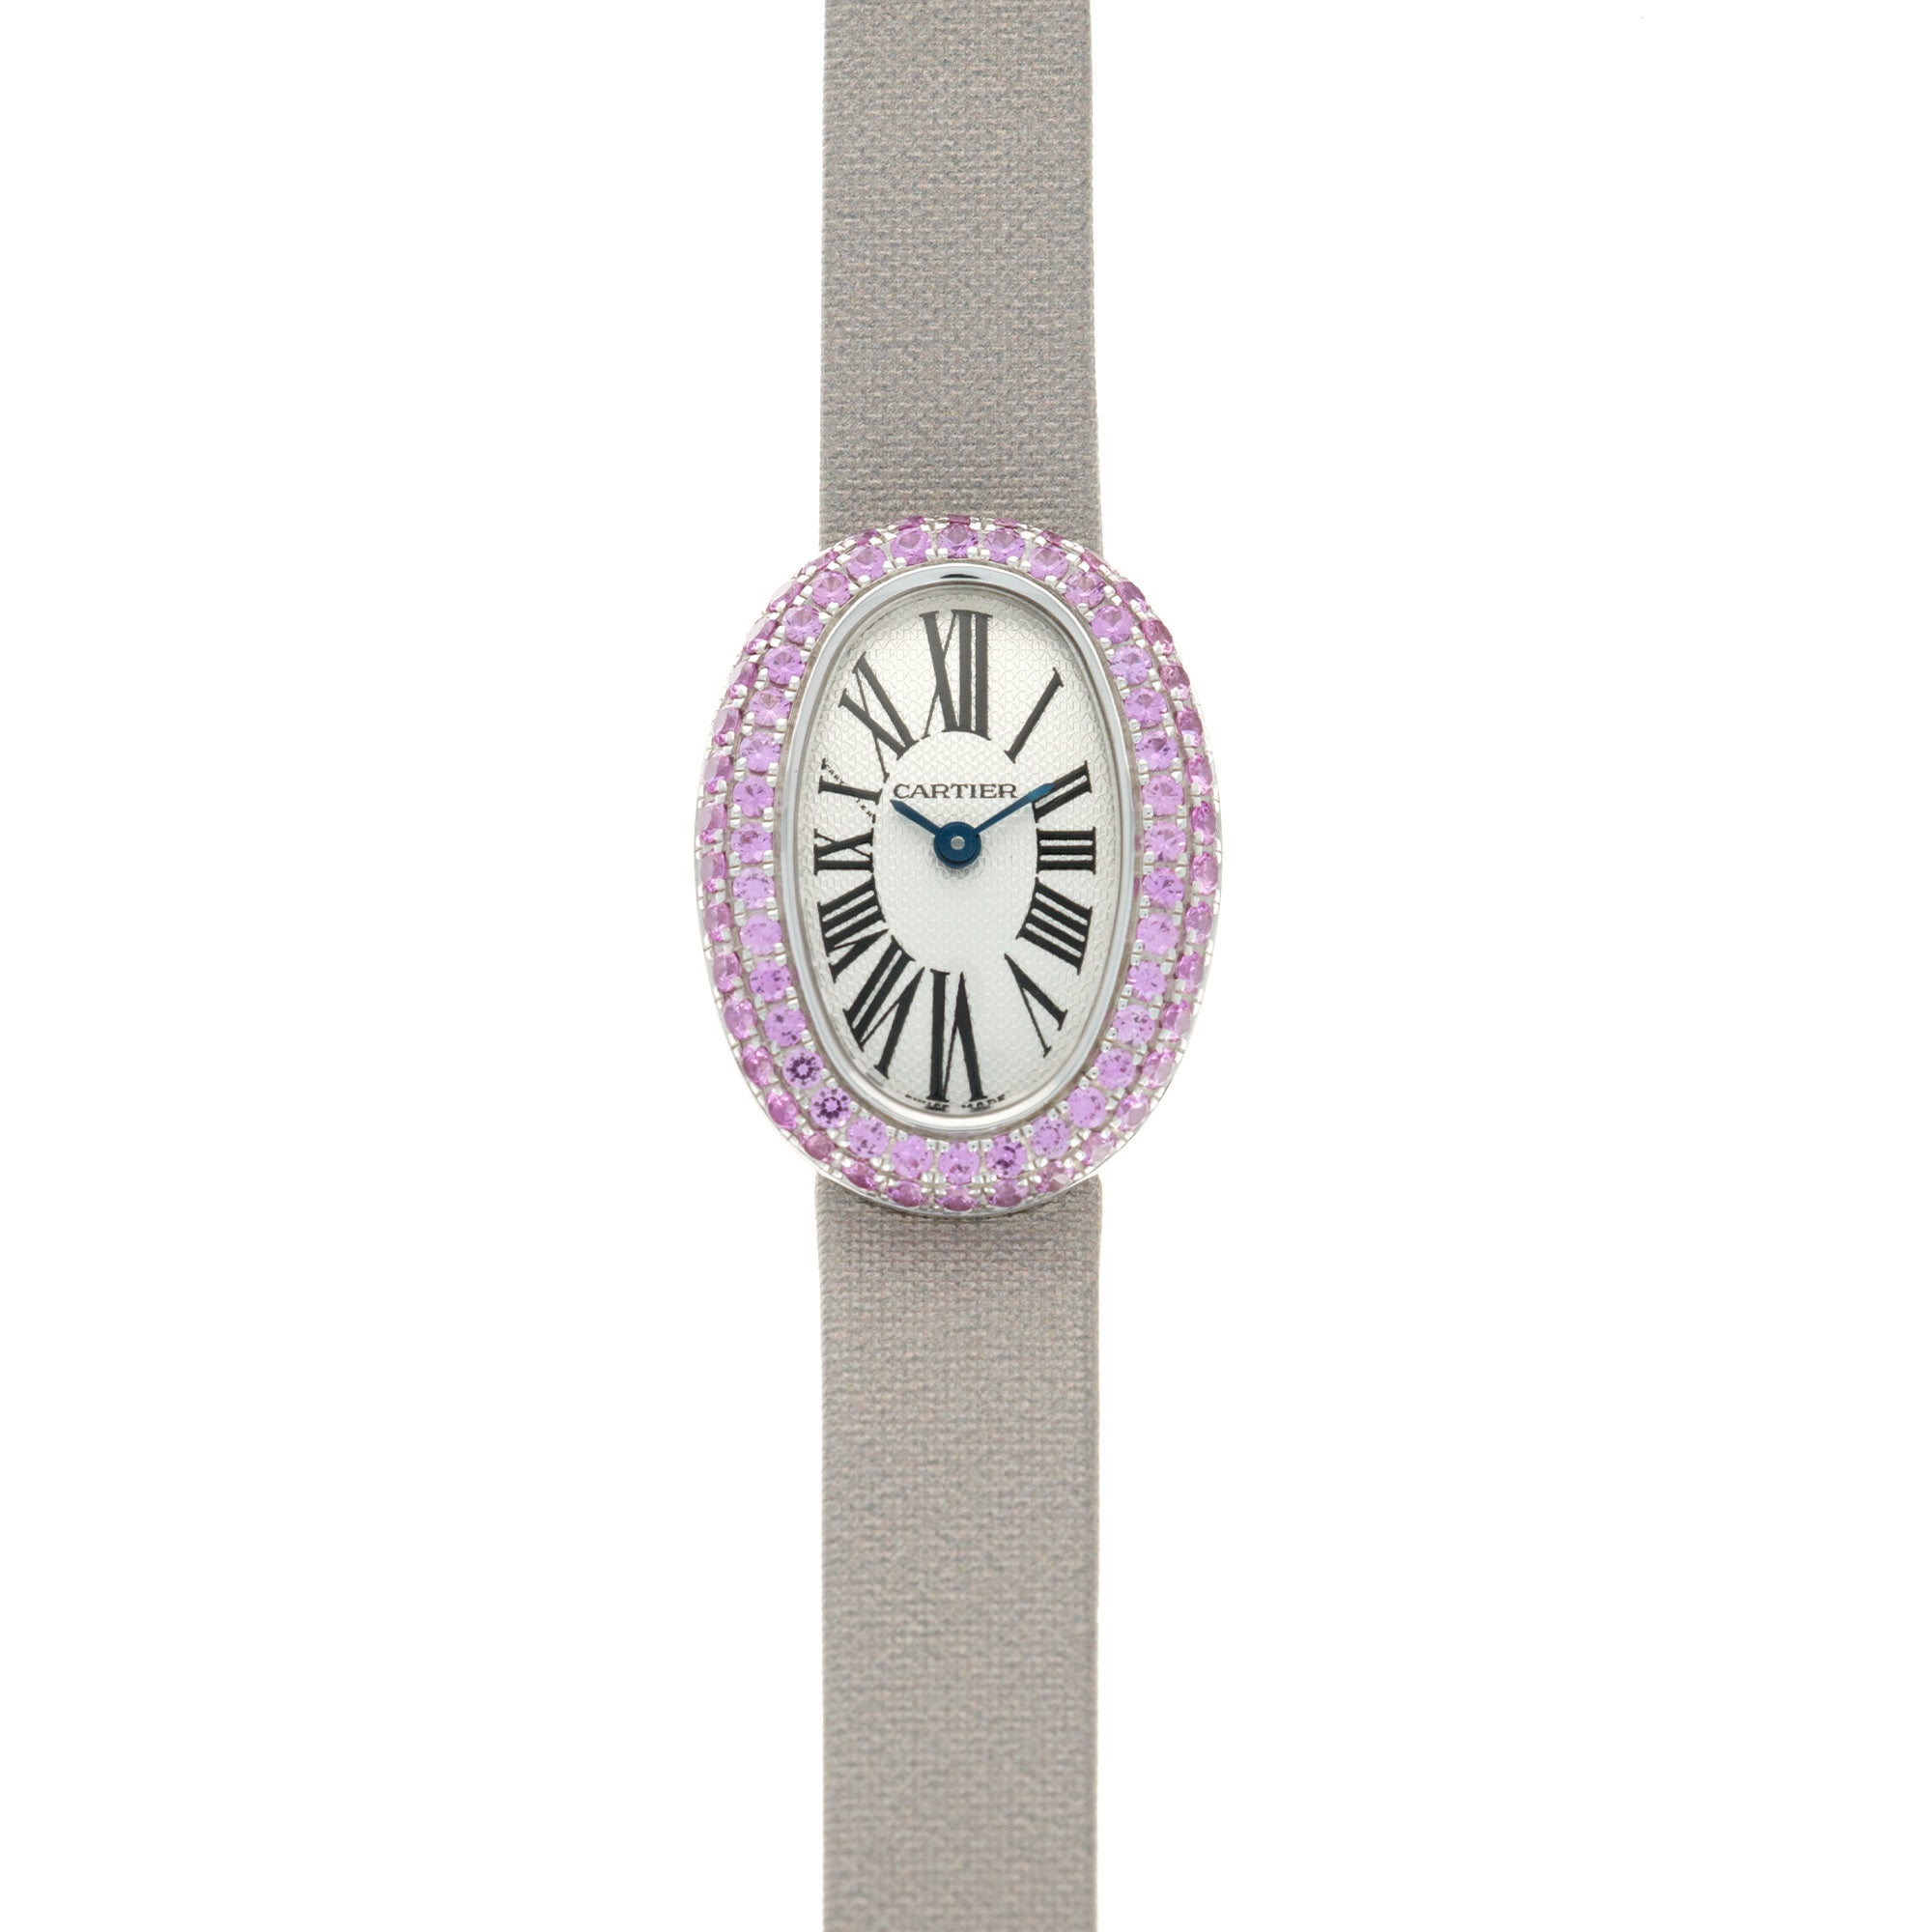 Cartier - Cartier White Gold Baignoire Pink Sapphire Watch - The Keystone Watches